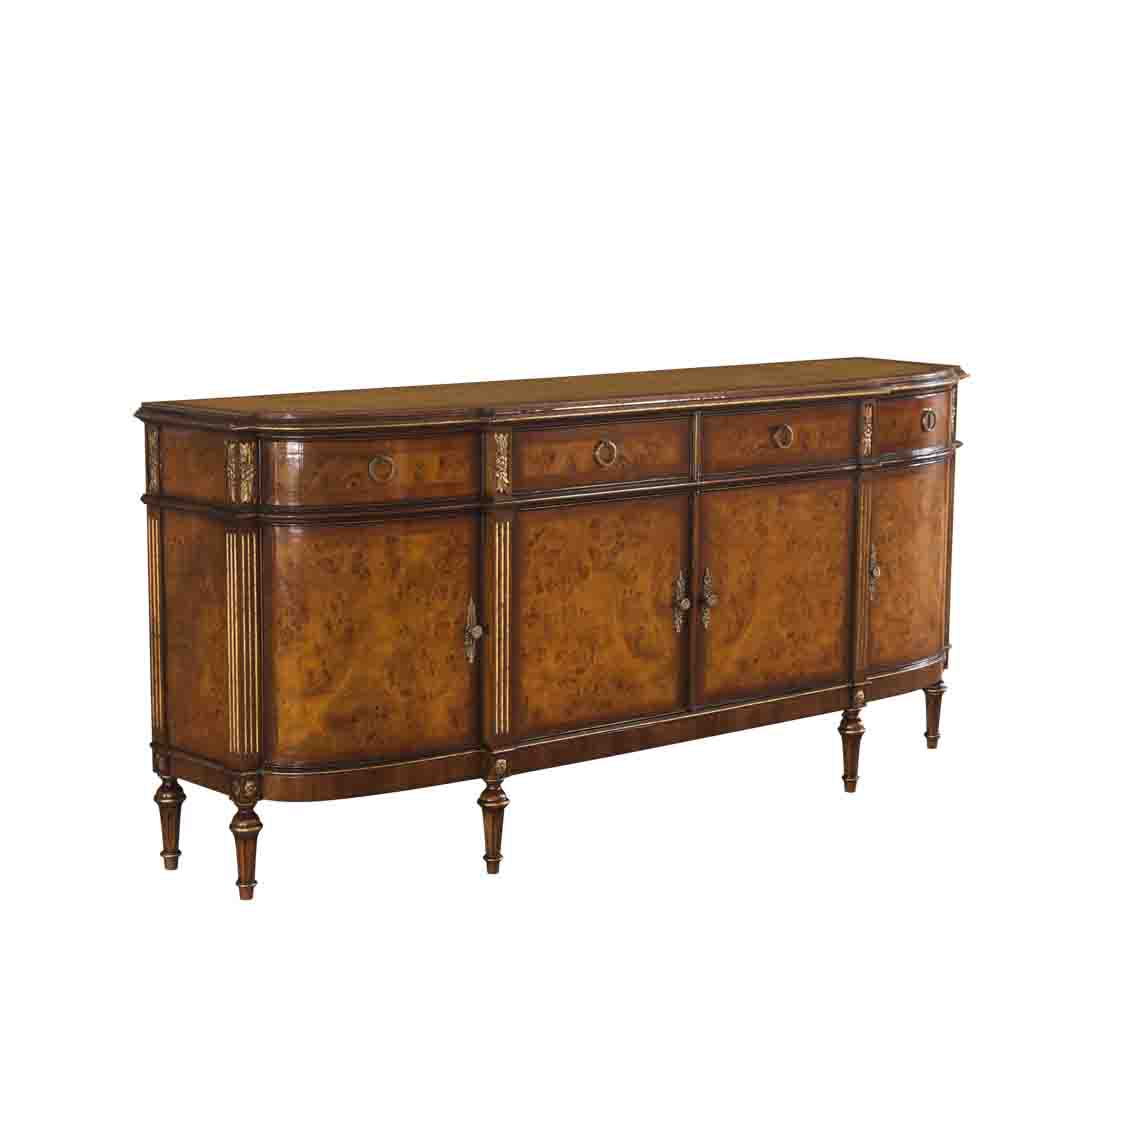 Stunningly beautiful sideboard in Italian Mapa burl., inspired by  Louis XVI design, it shows acanthus leaves and  rosette square. Comes with 4 drawers and 4 doors for ample storage space.